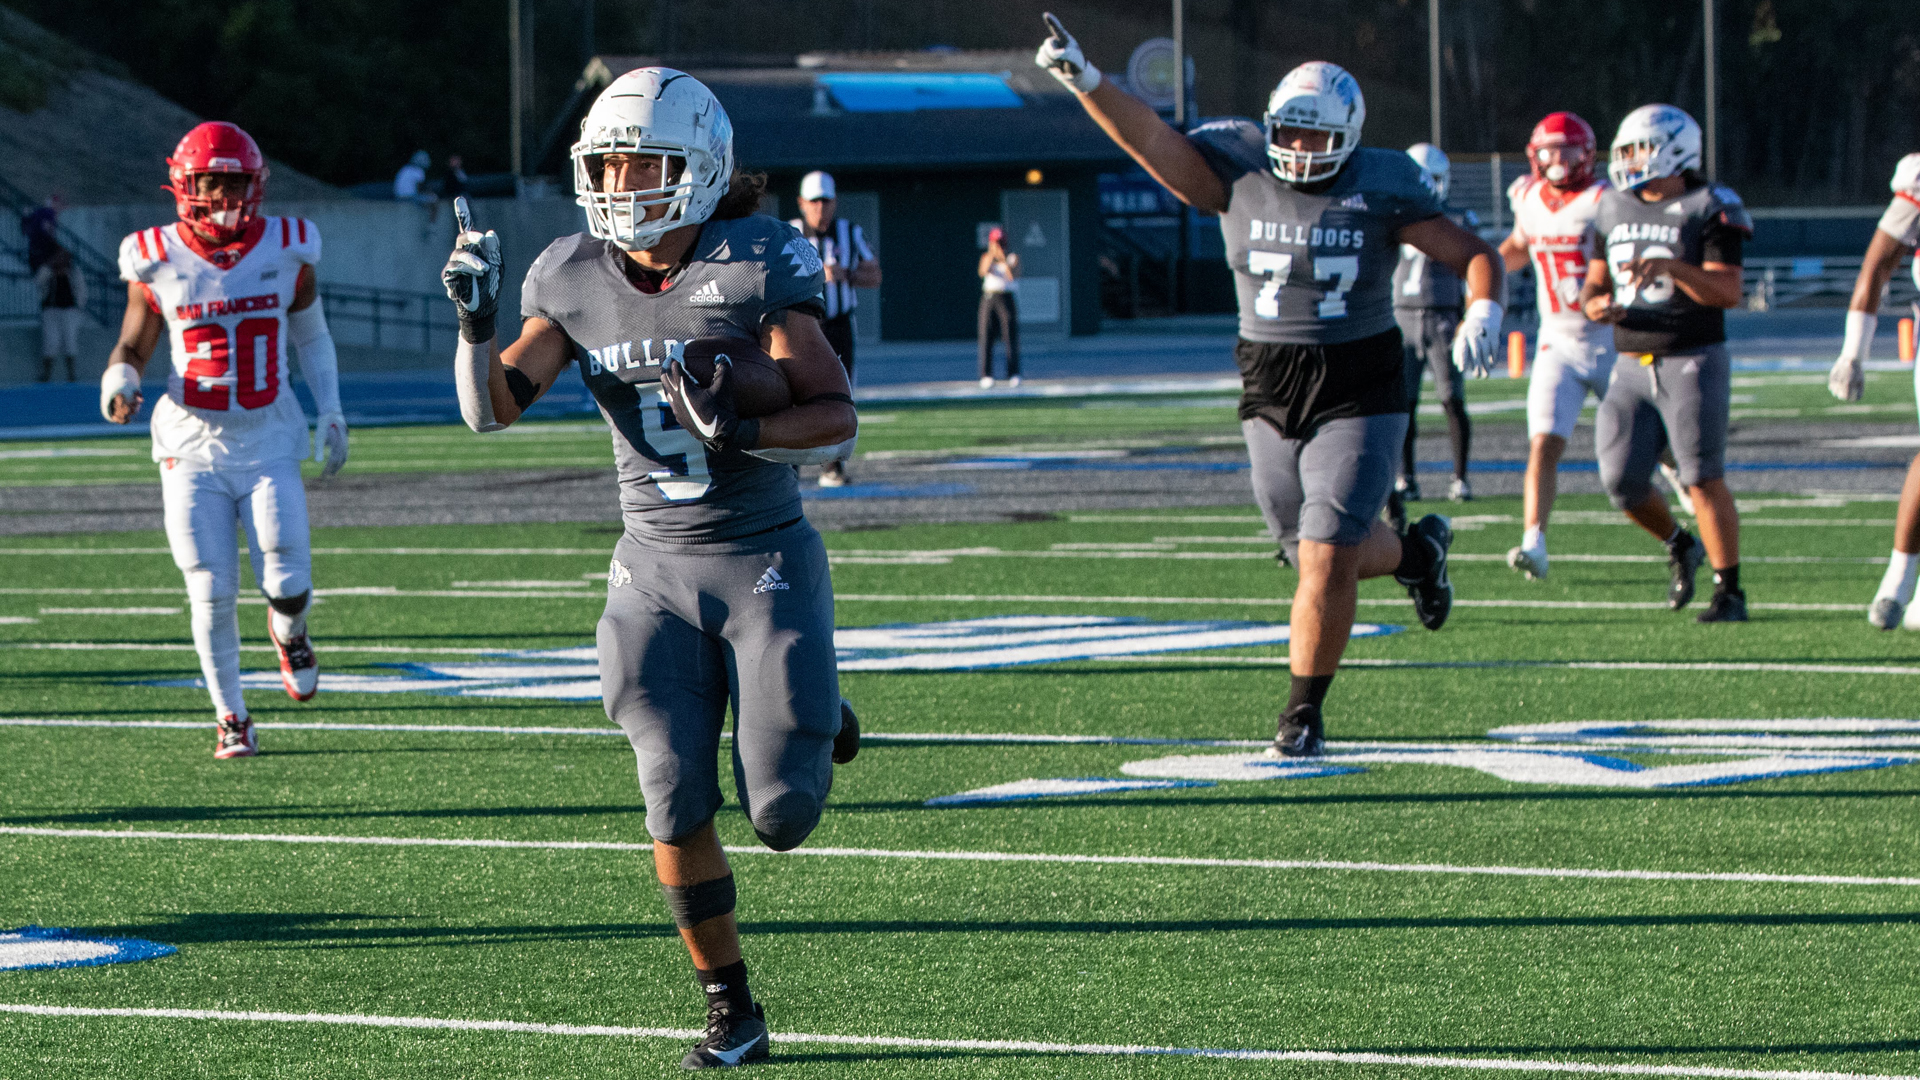 Nate Sanchez runs in for a 34-yard TD in the Bulldogs' win over CCSF. (Photo by Ronald Rugel Photography)